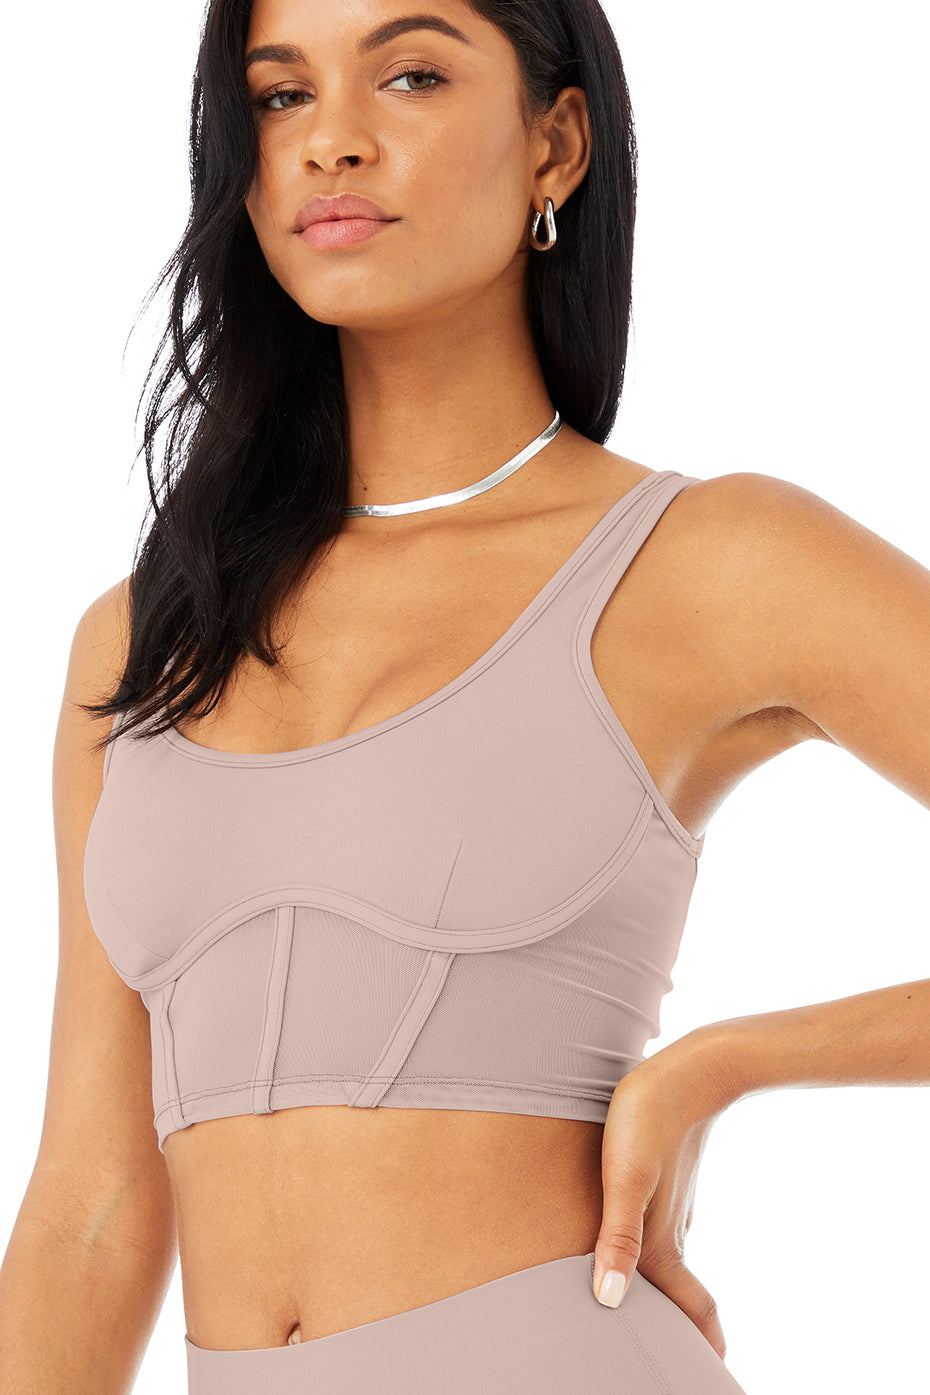 Airbrush Mesh Corset Tank Top in Espresso by Alo Yoga - Work Well Daily